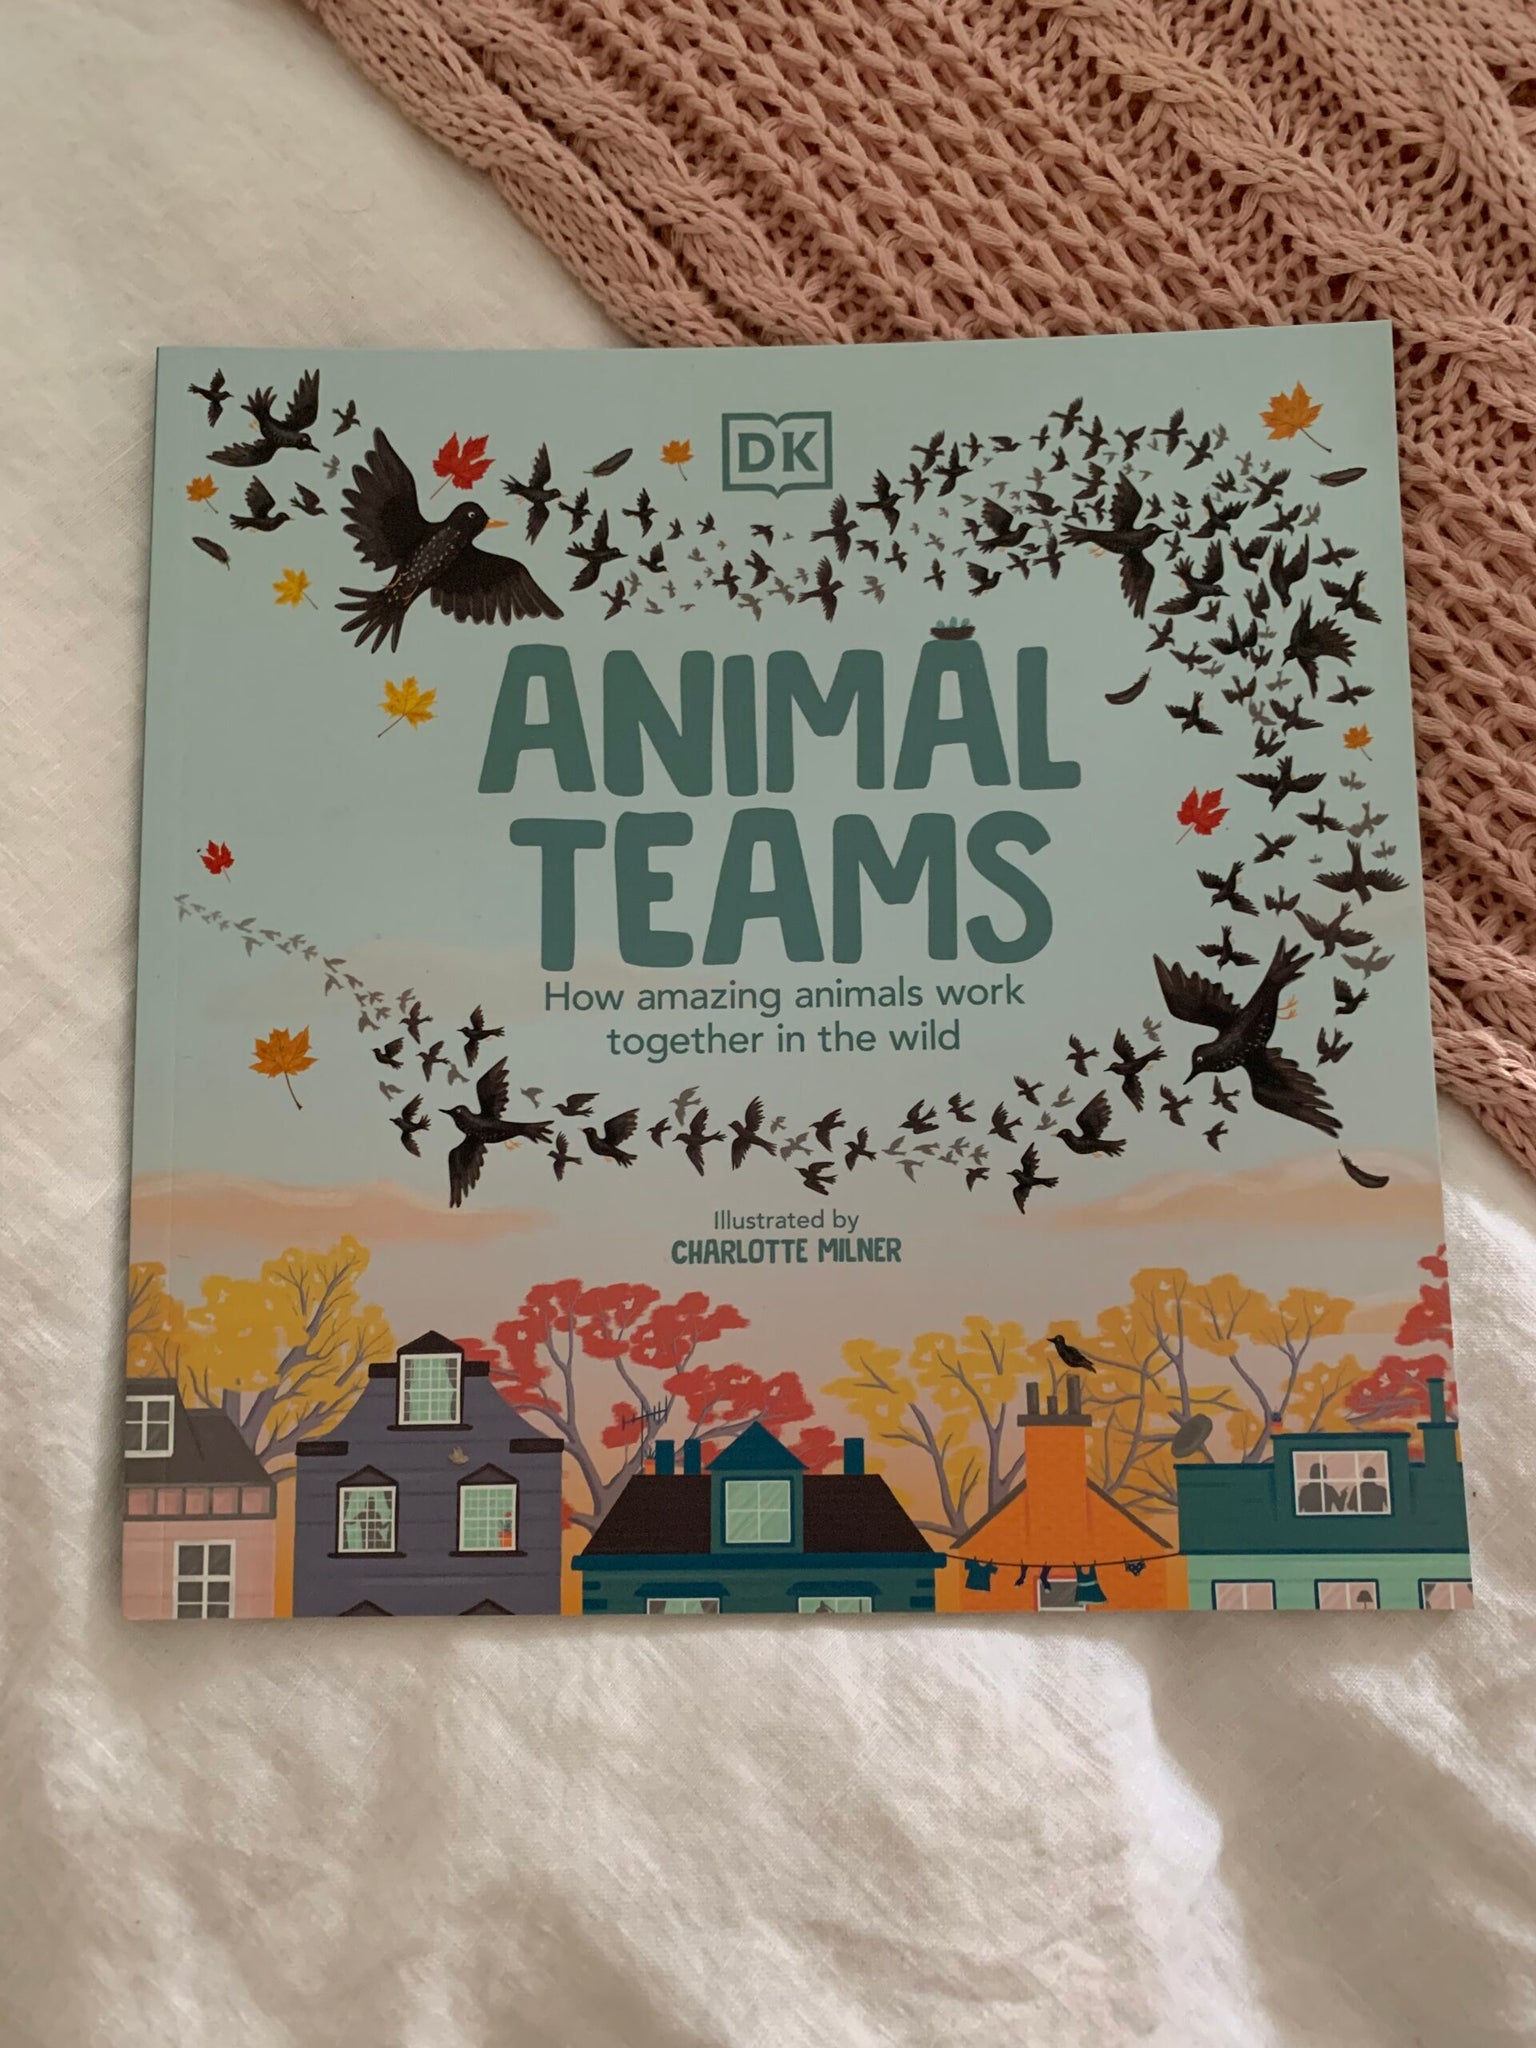 Animal Teams book for kids See how different animal groups work together to survive in the wild, protect each other from danger, and share their food and warmth.